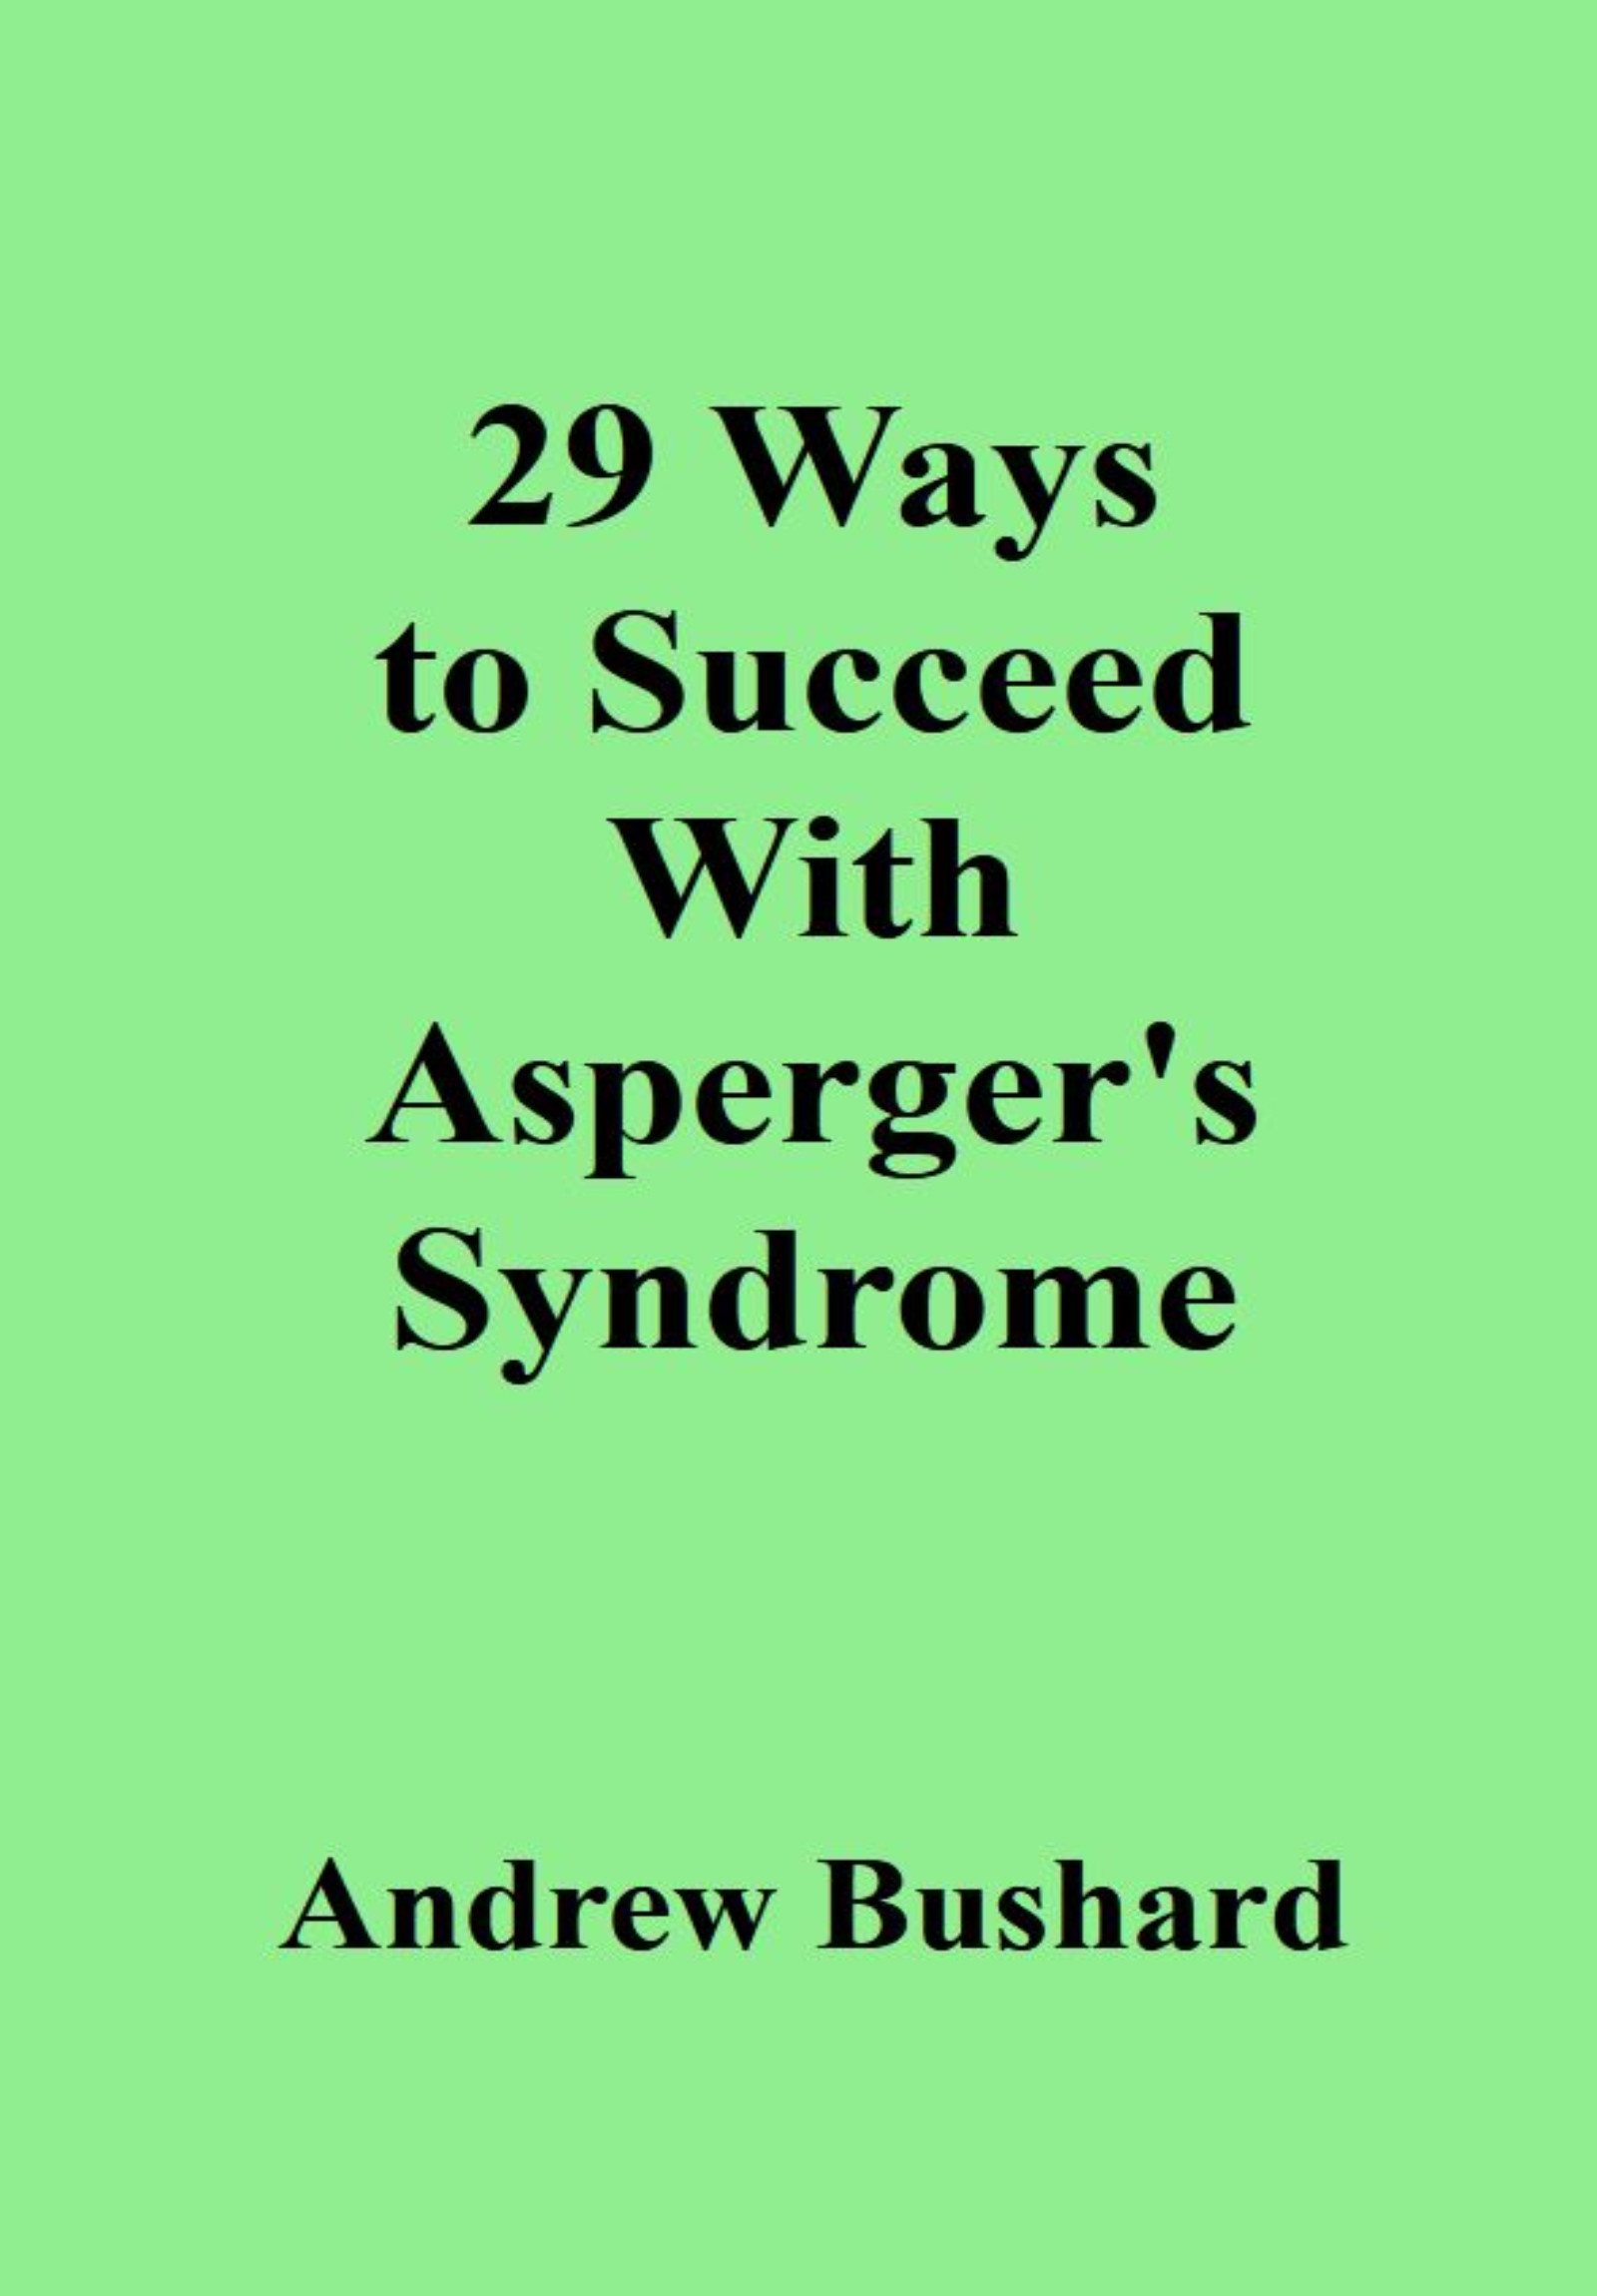 29 Ways to Succeed with Asperger's Syndrome's featured image